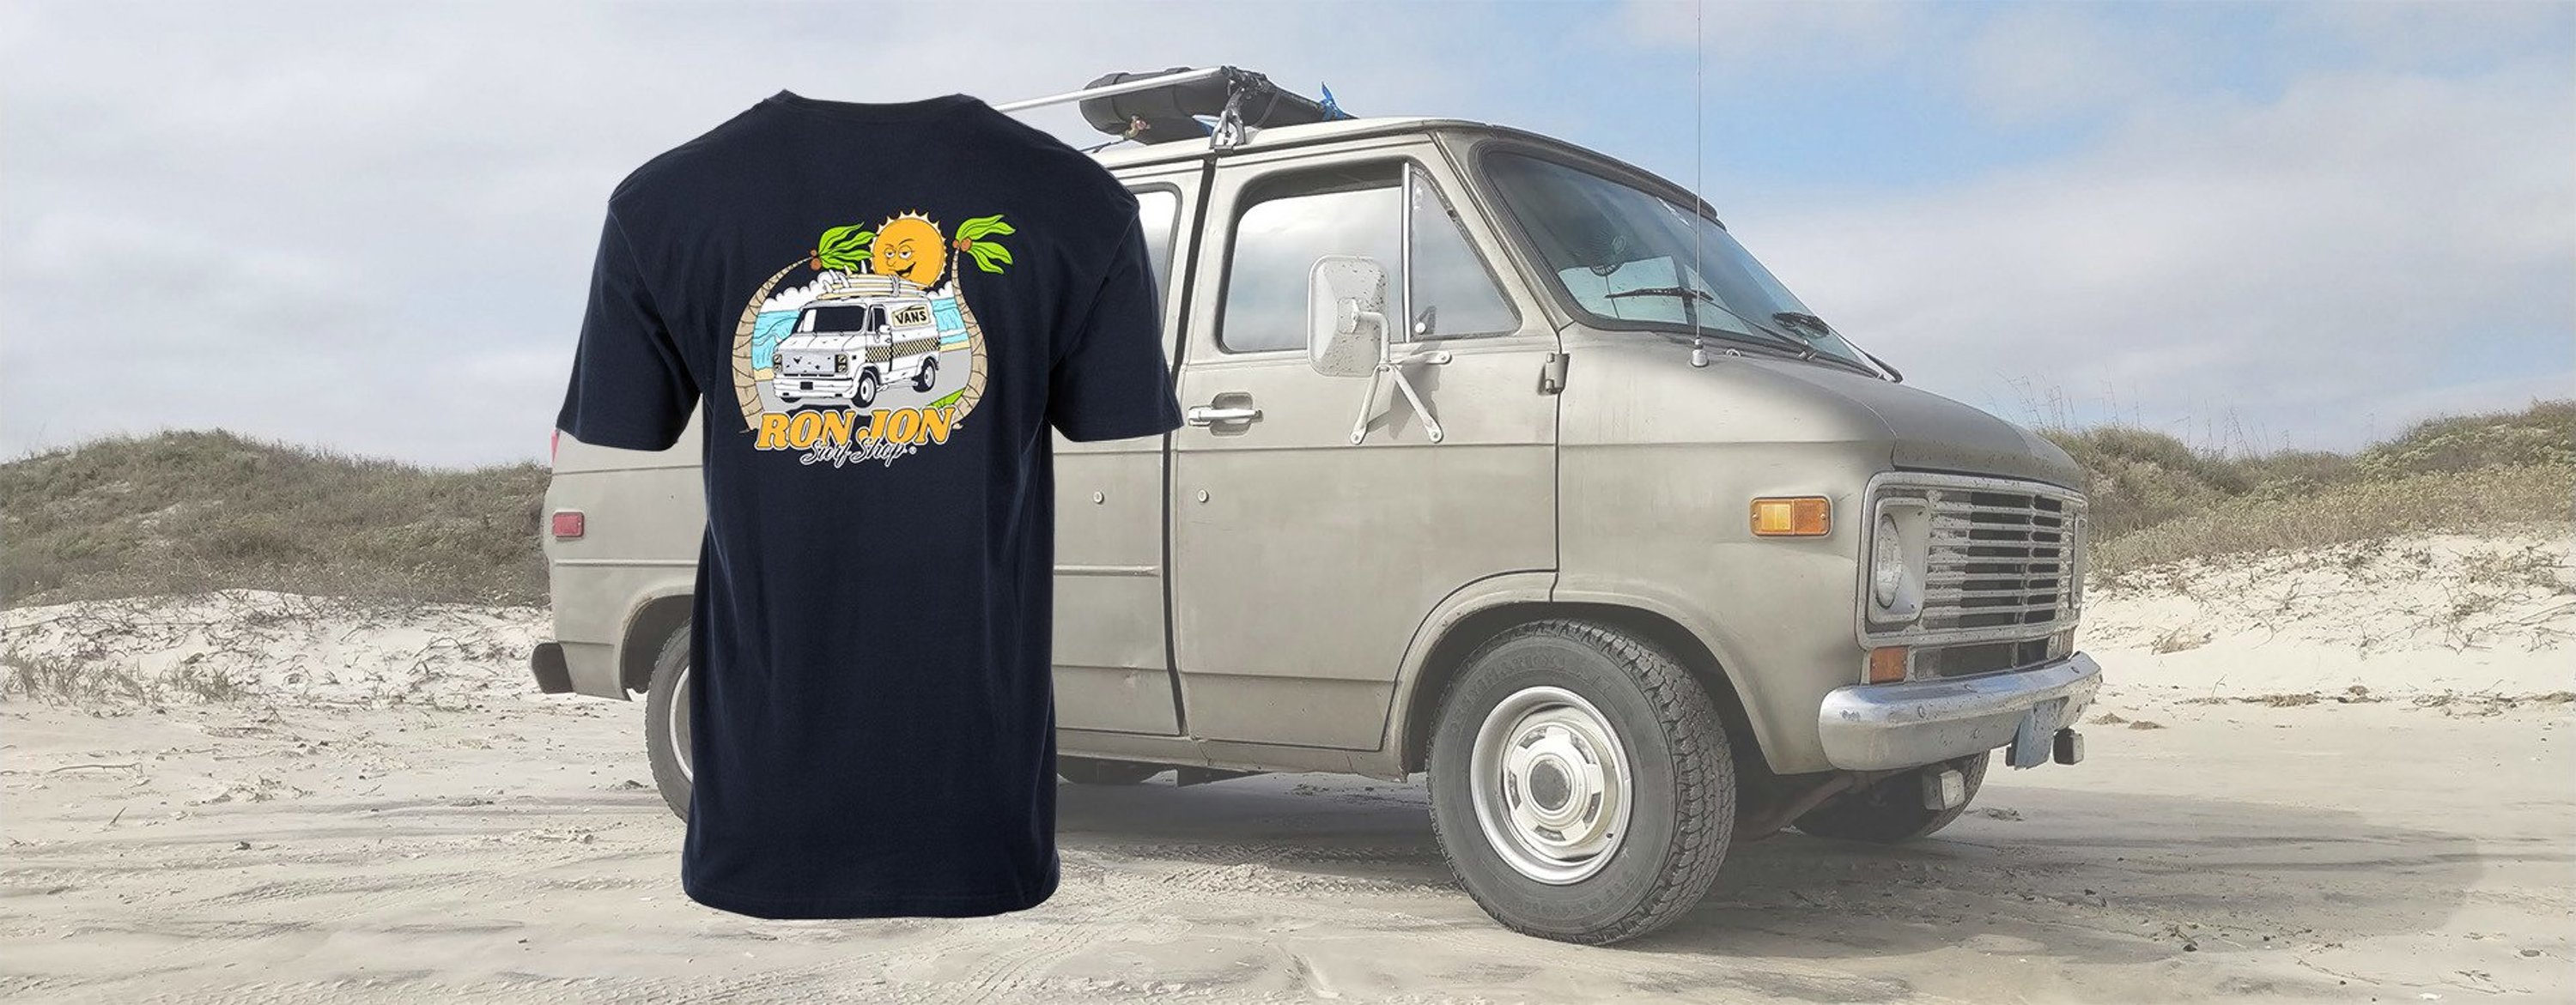 vans collaboration tee overlayed on a background an old van parked on the beach